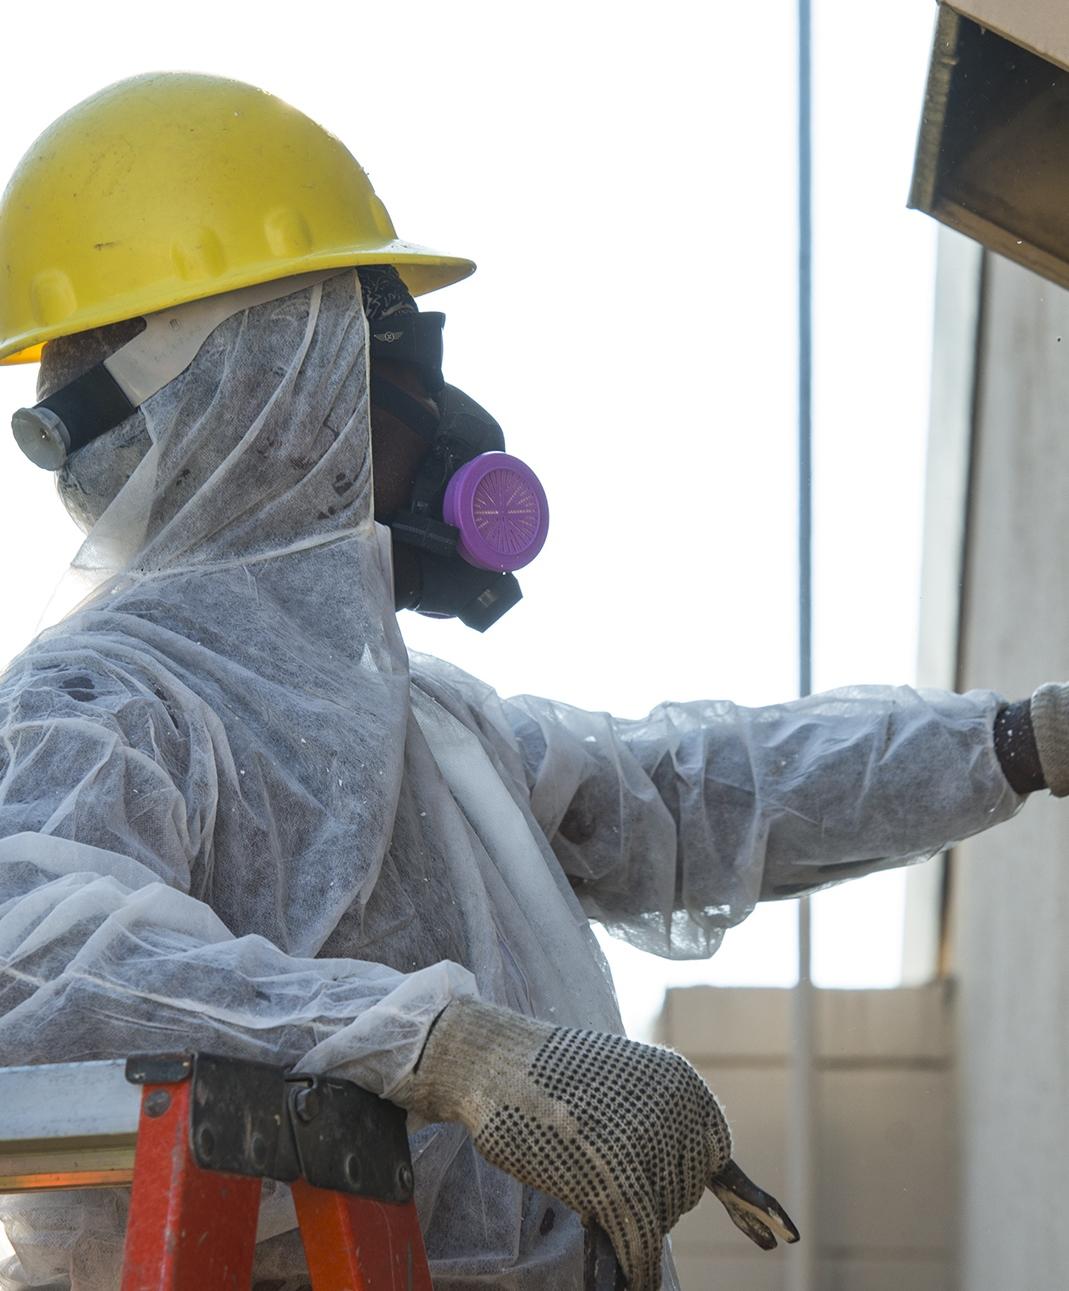 So, You Think You’ve Found An Asbestos Containing Material: What Now?